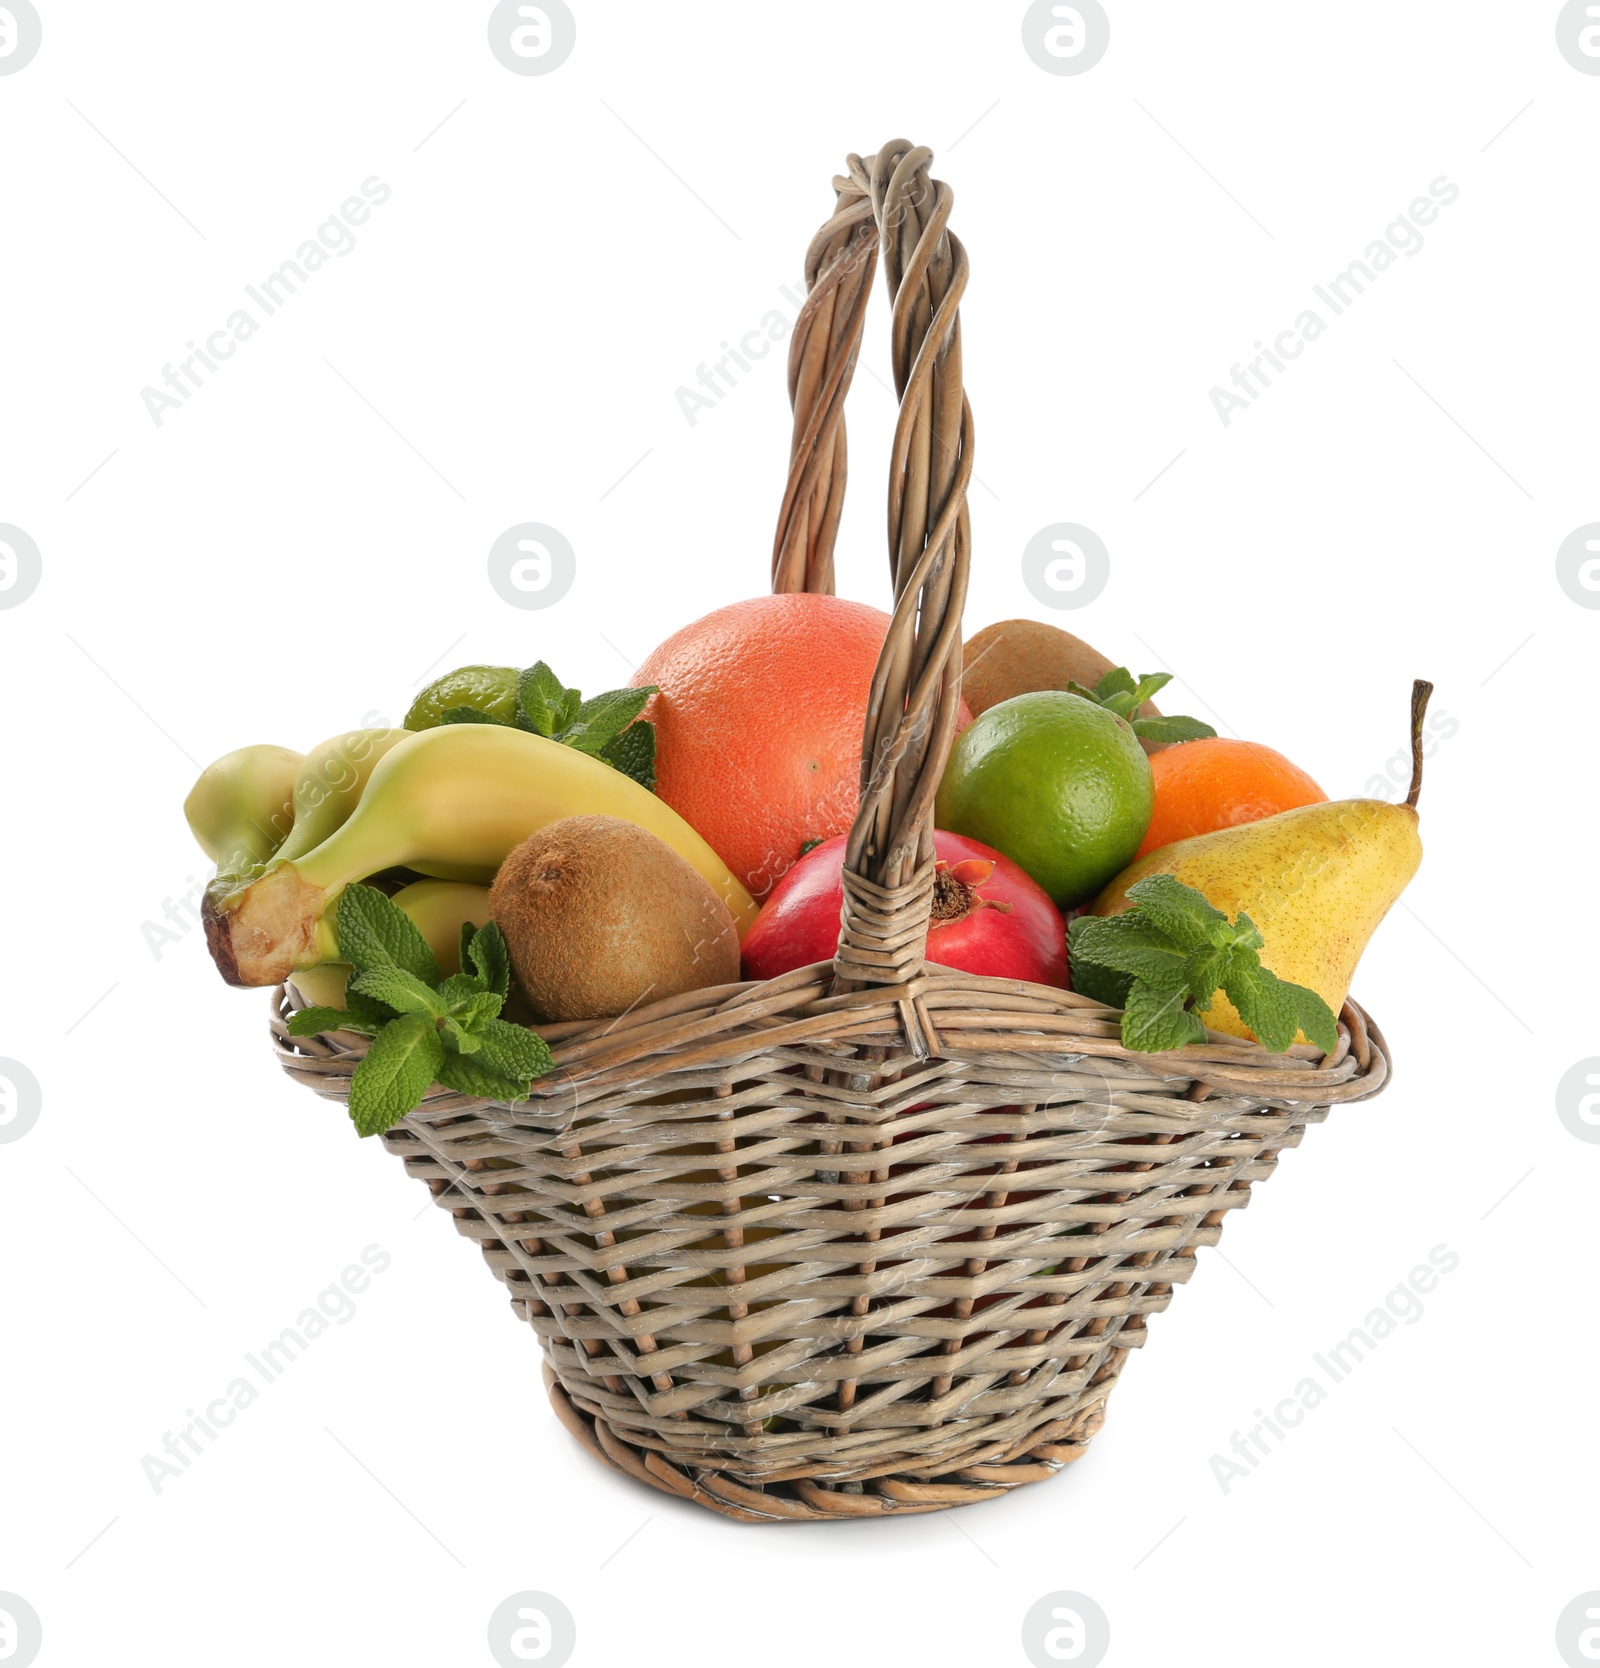 Photo of Wicker basket with different ripe fruits on white background